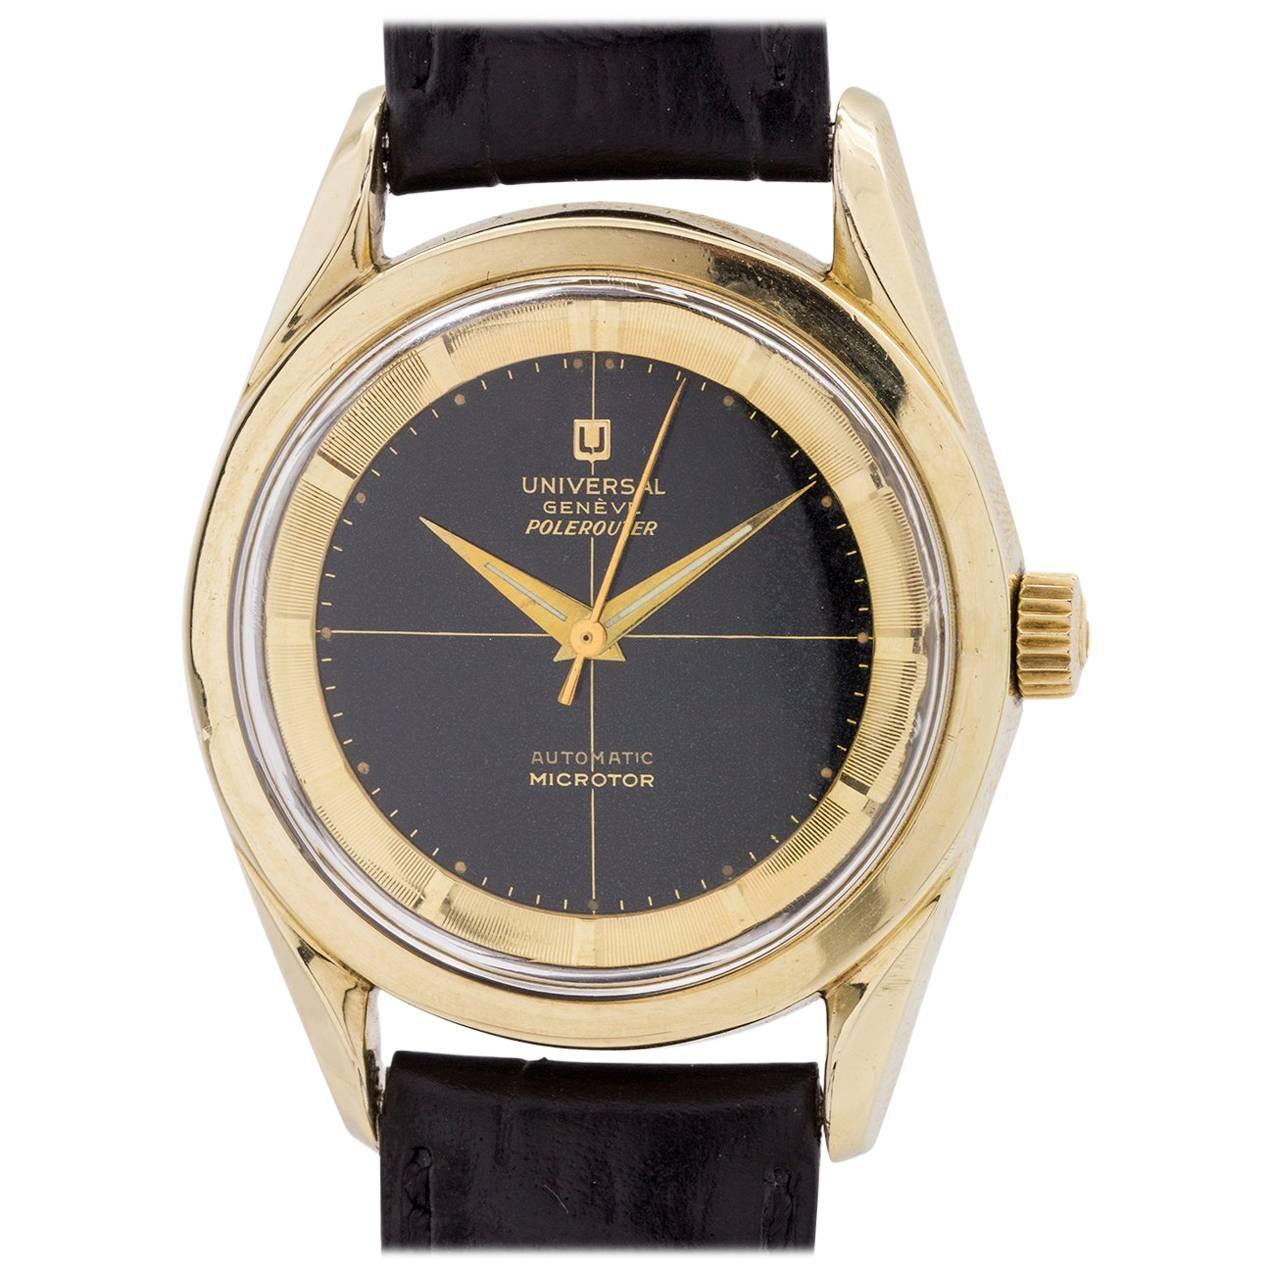 Universal Geneve Yellow Gold Stainless Steel Polerouter Wristwatch, circa 1960s